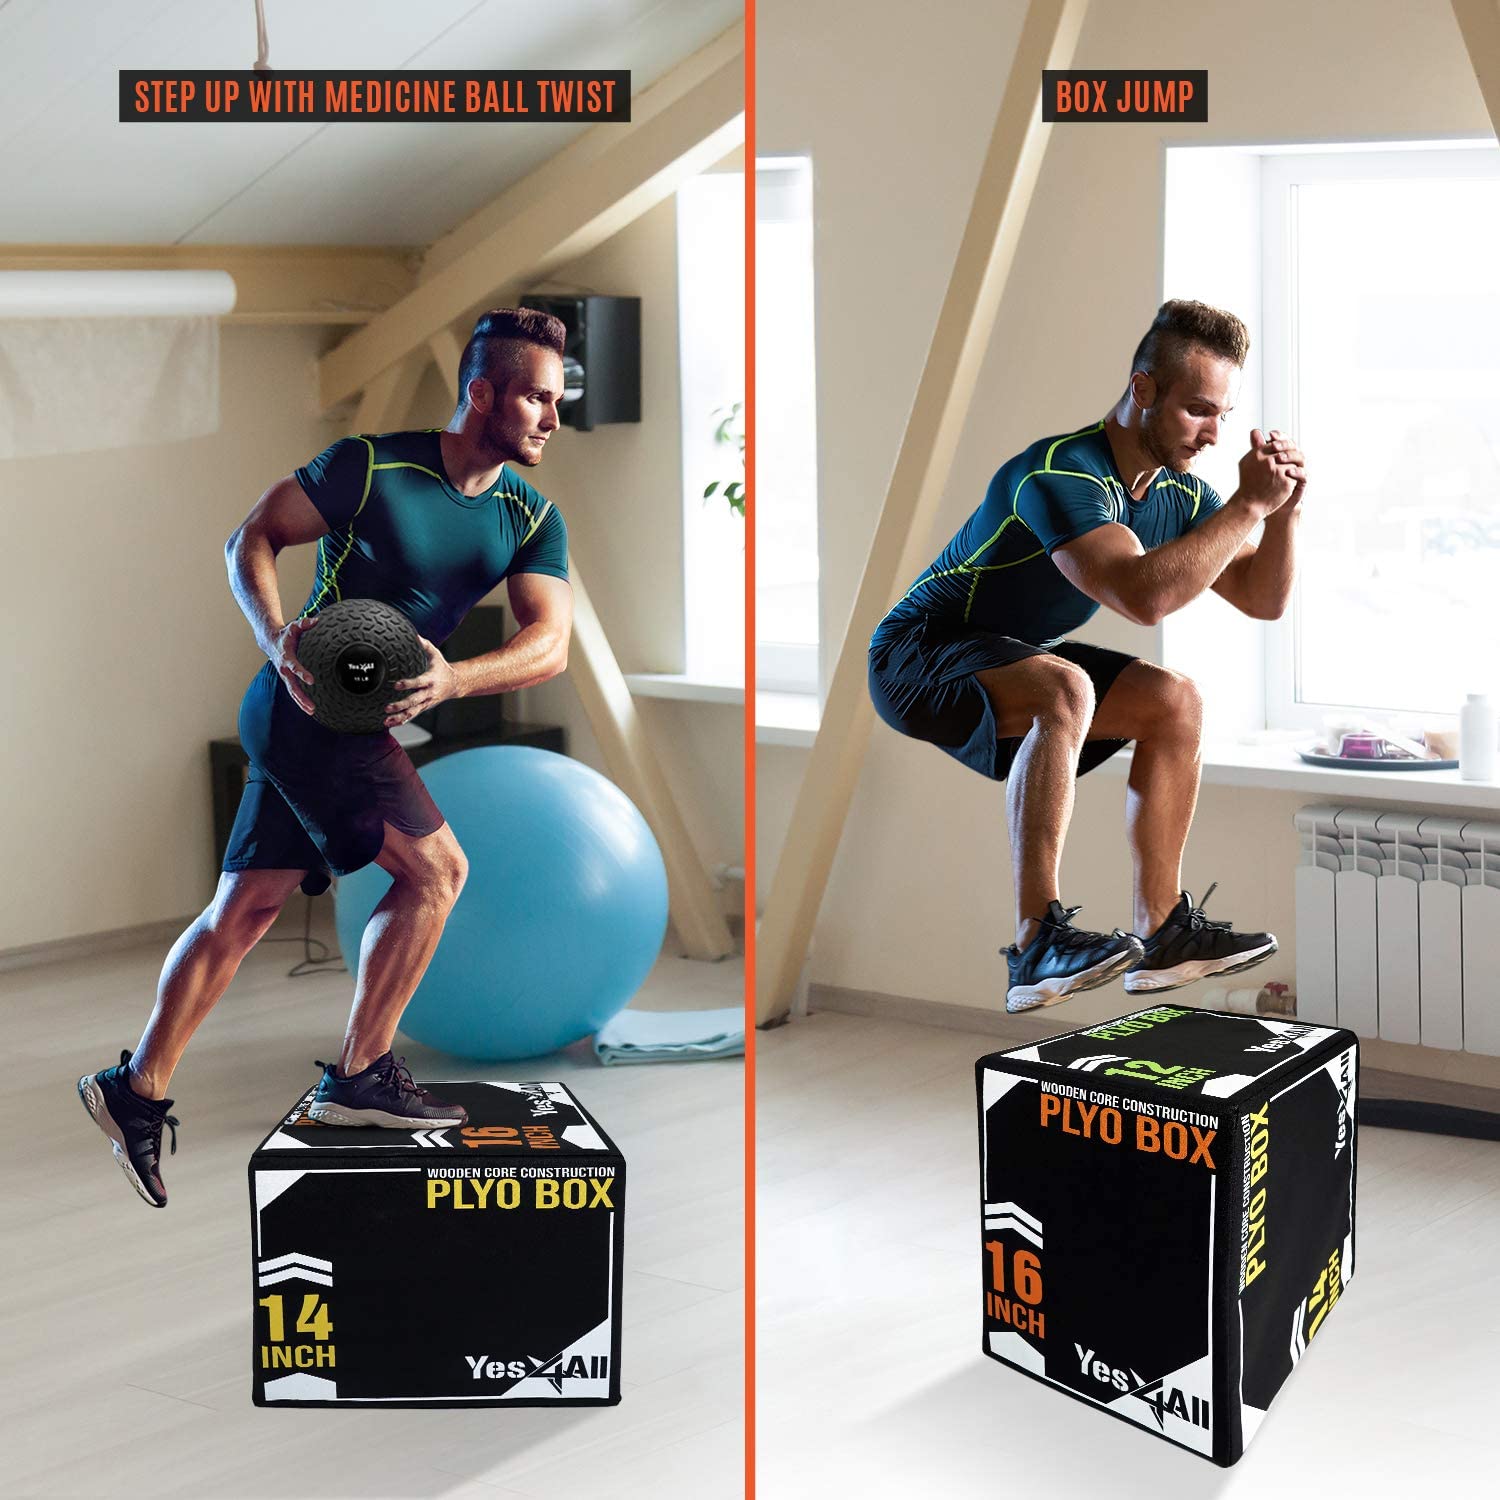 Yes4All 3-in-1 16"x14"x12" Soft Plyo Box Wooden Core, Foam for Jumping Exercise, Crossfit, Black - image 5 of 7